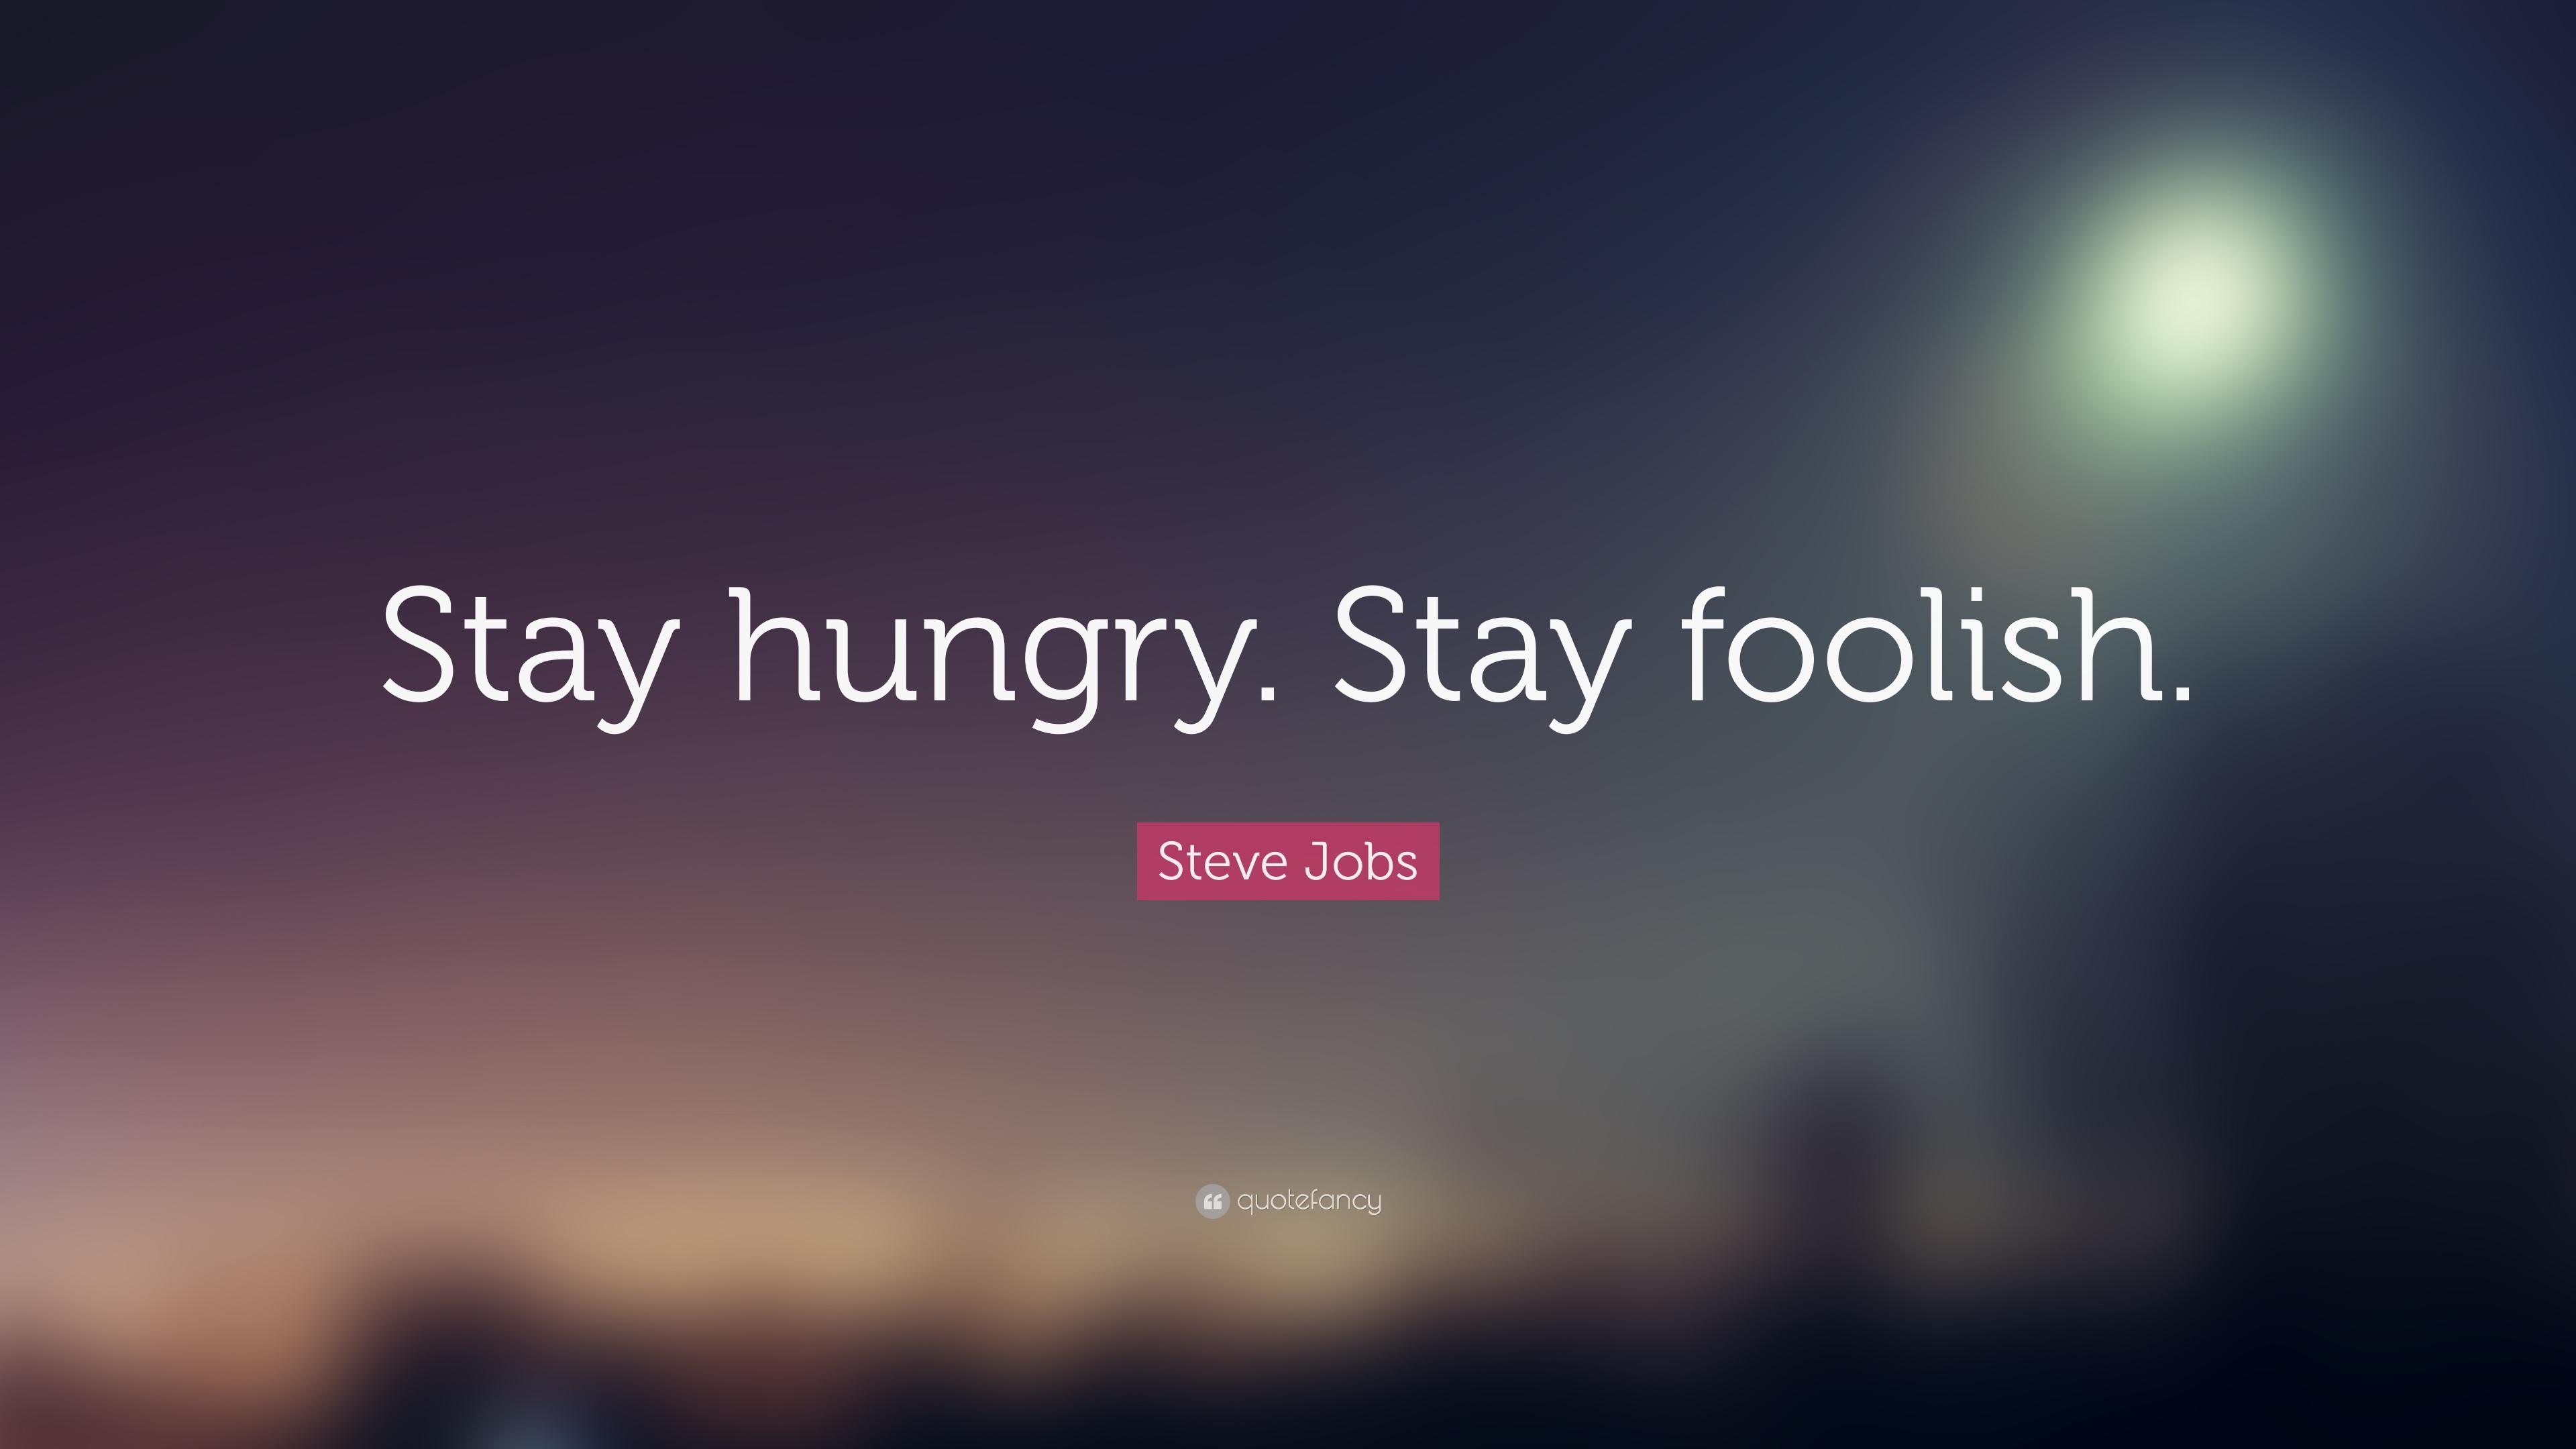 Steve Jobs Quote: “Stay hungry. Stay foolish.” 41